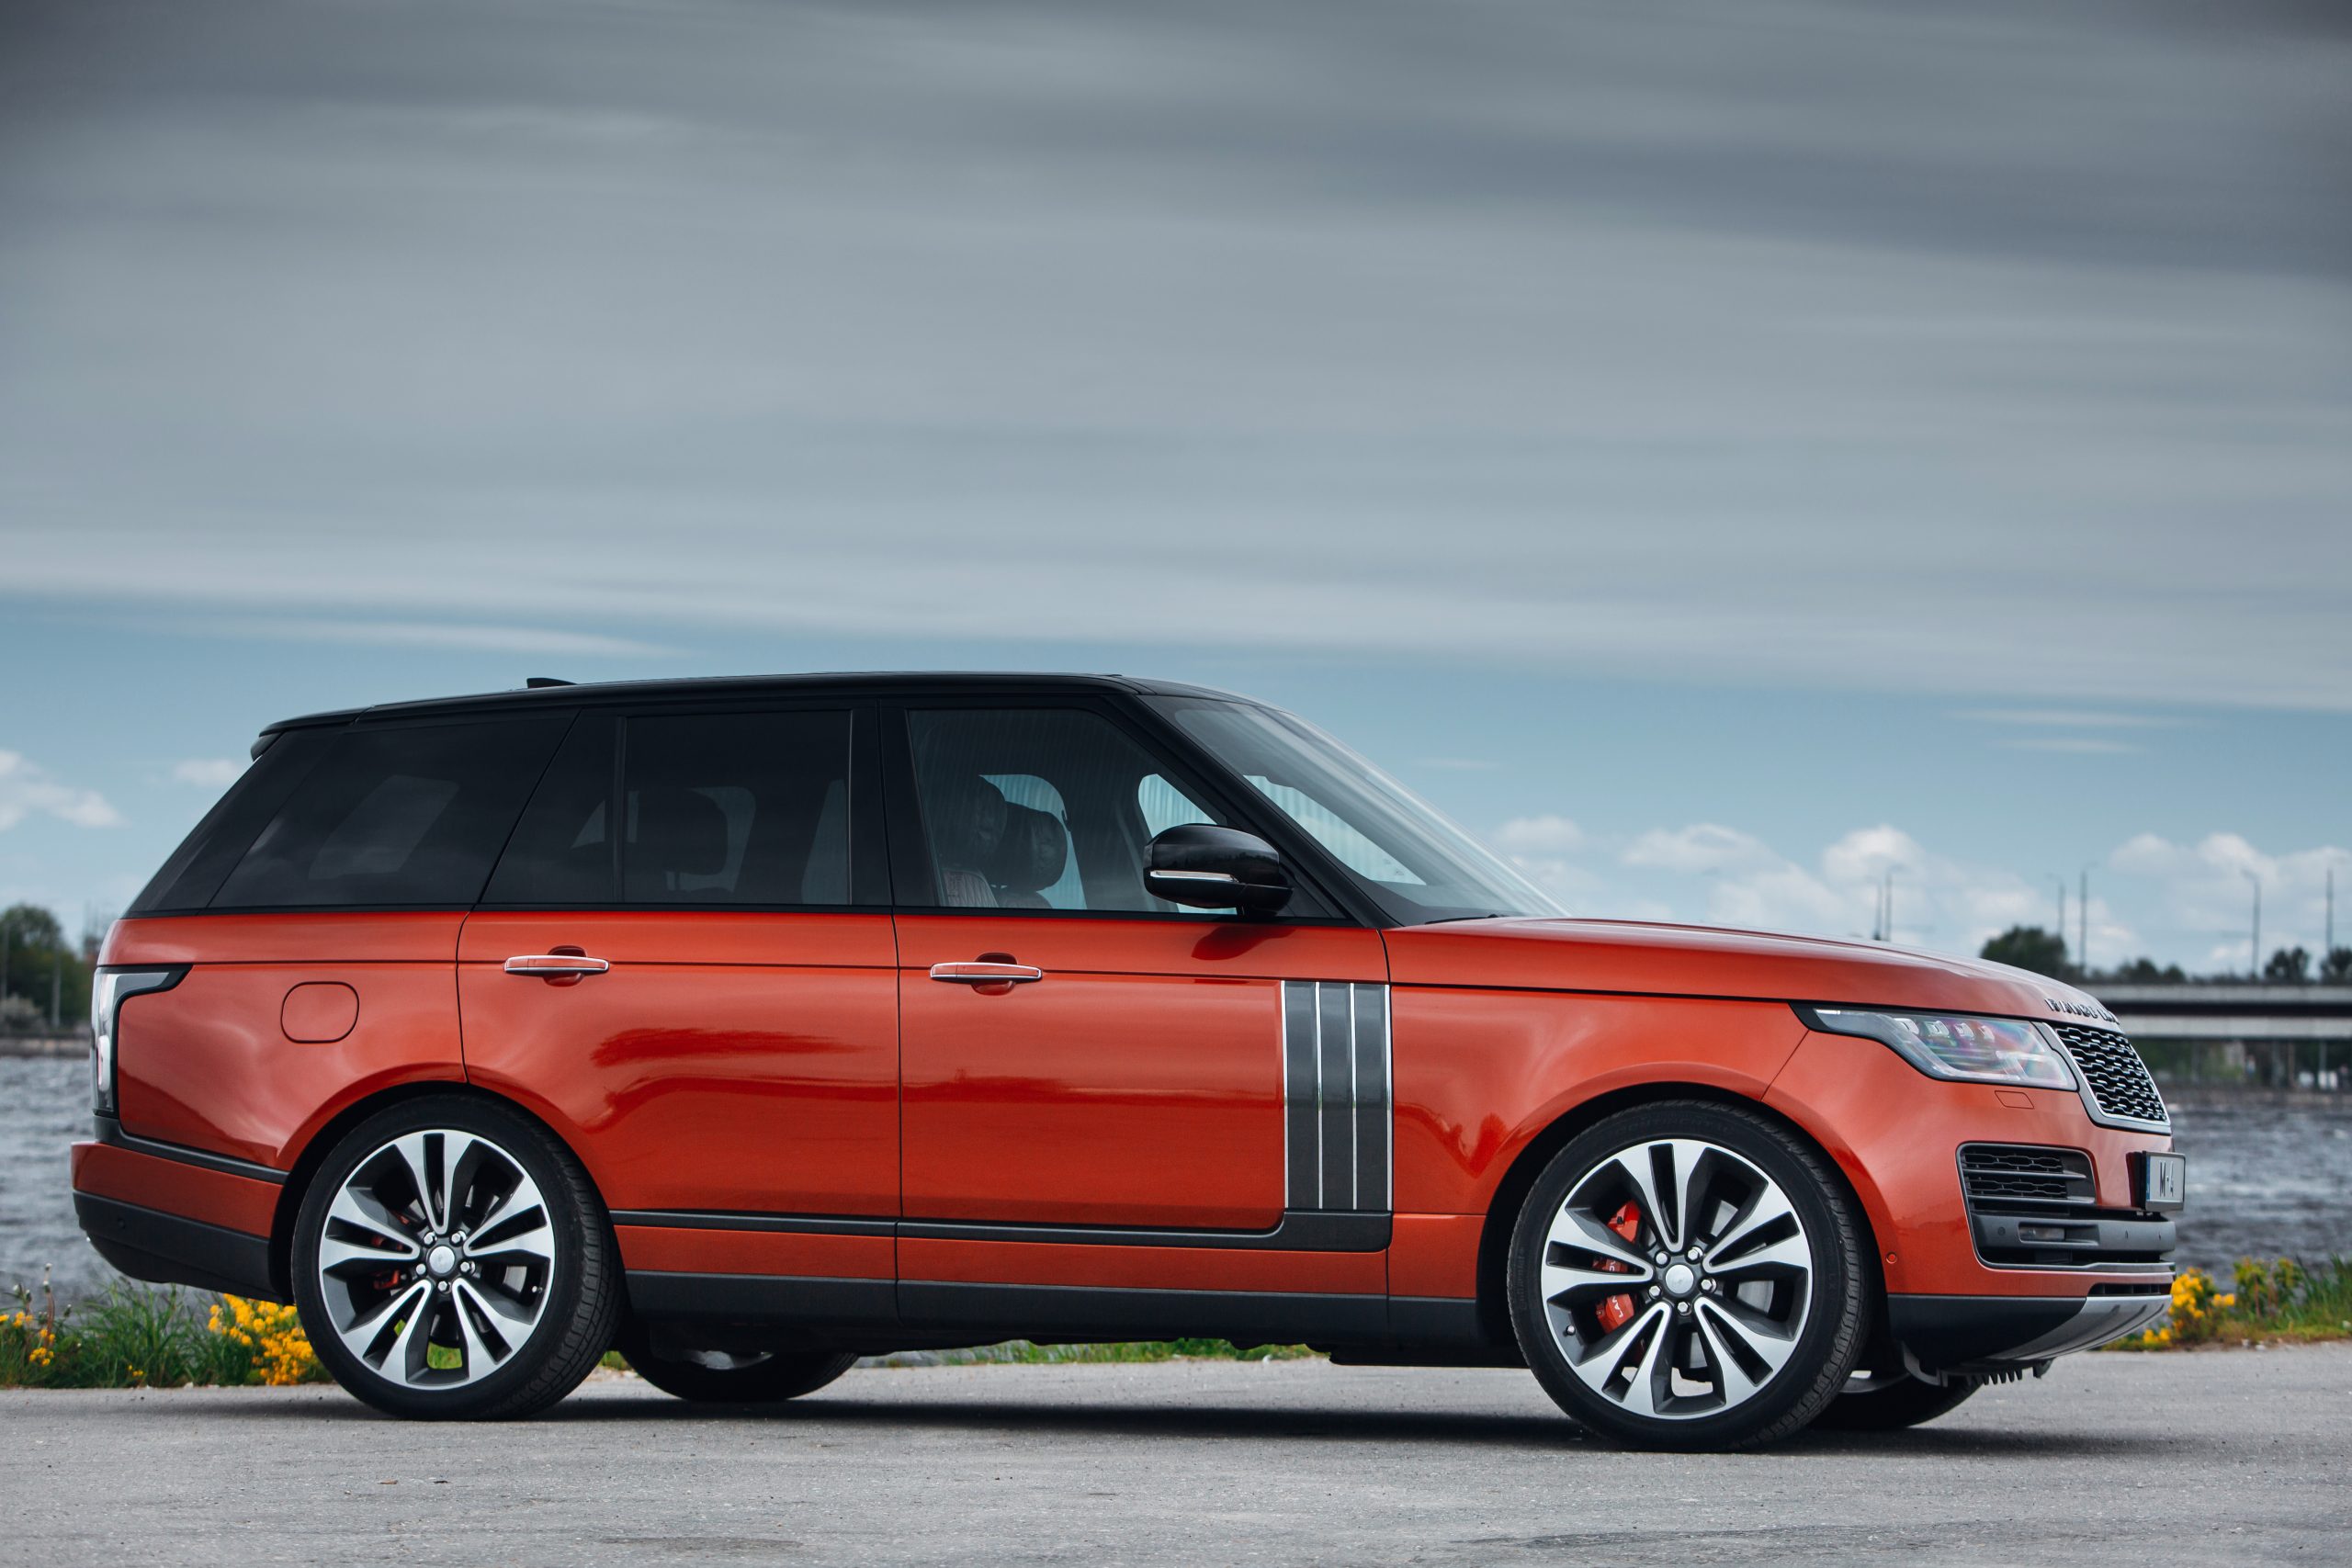 A lawsuit claims range rovers have defective outlet pipes